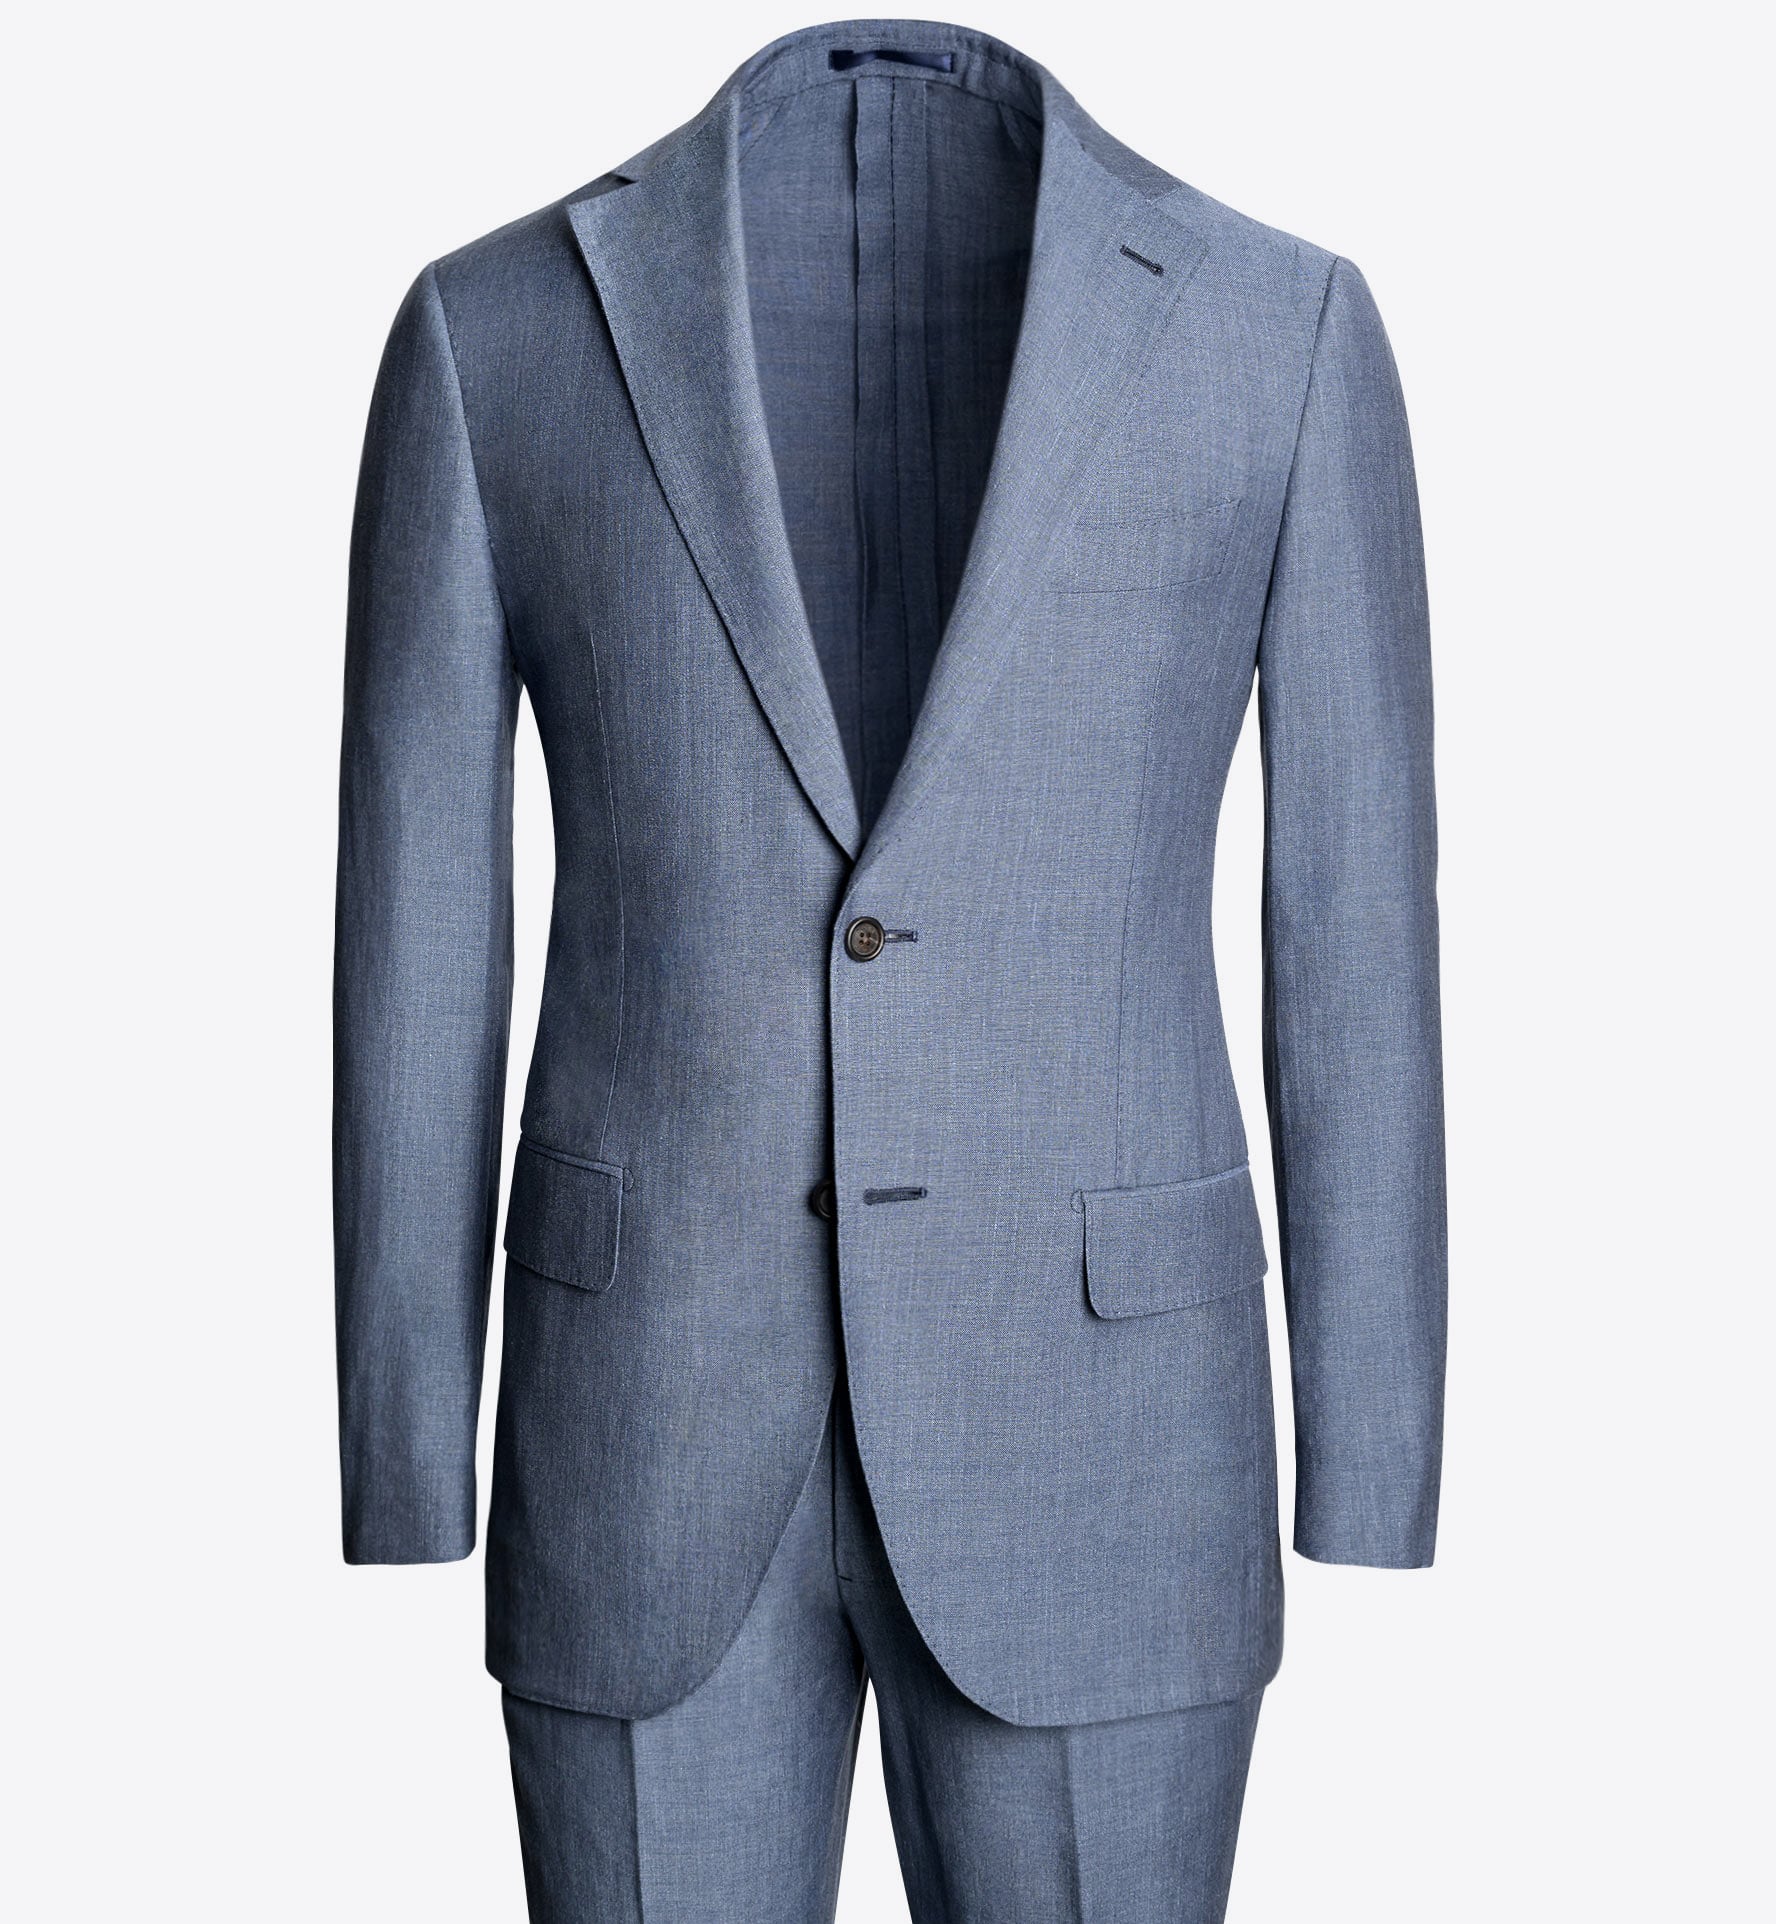 Zoom Image of Bedford Indigo Linen Wool and Silk Suit